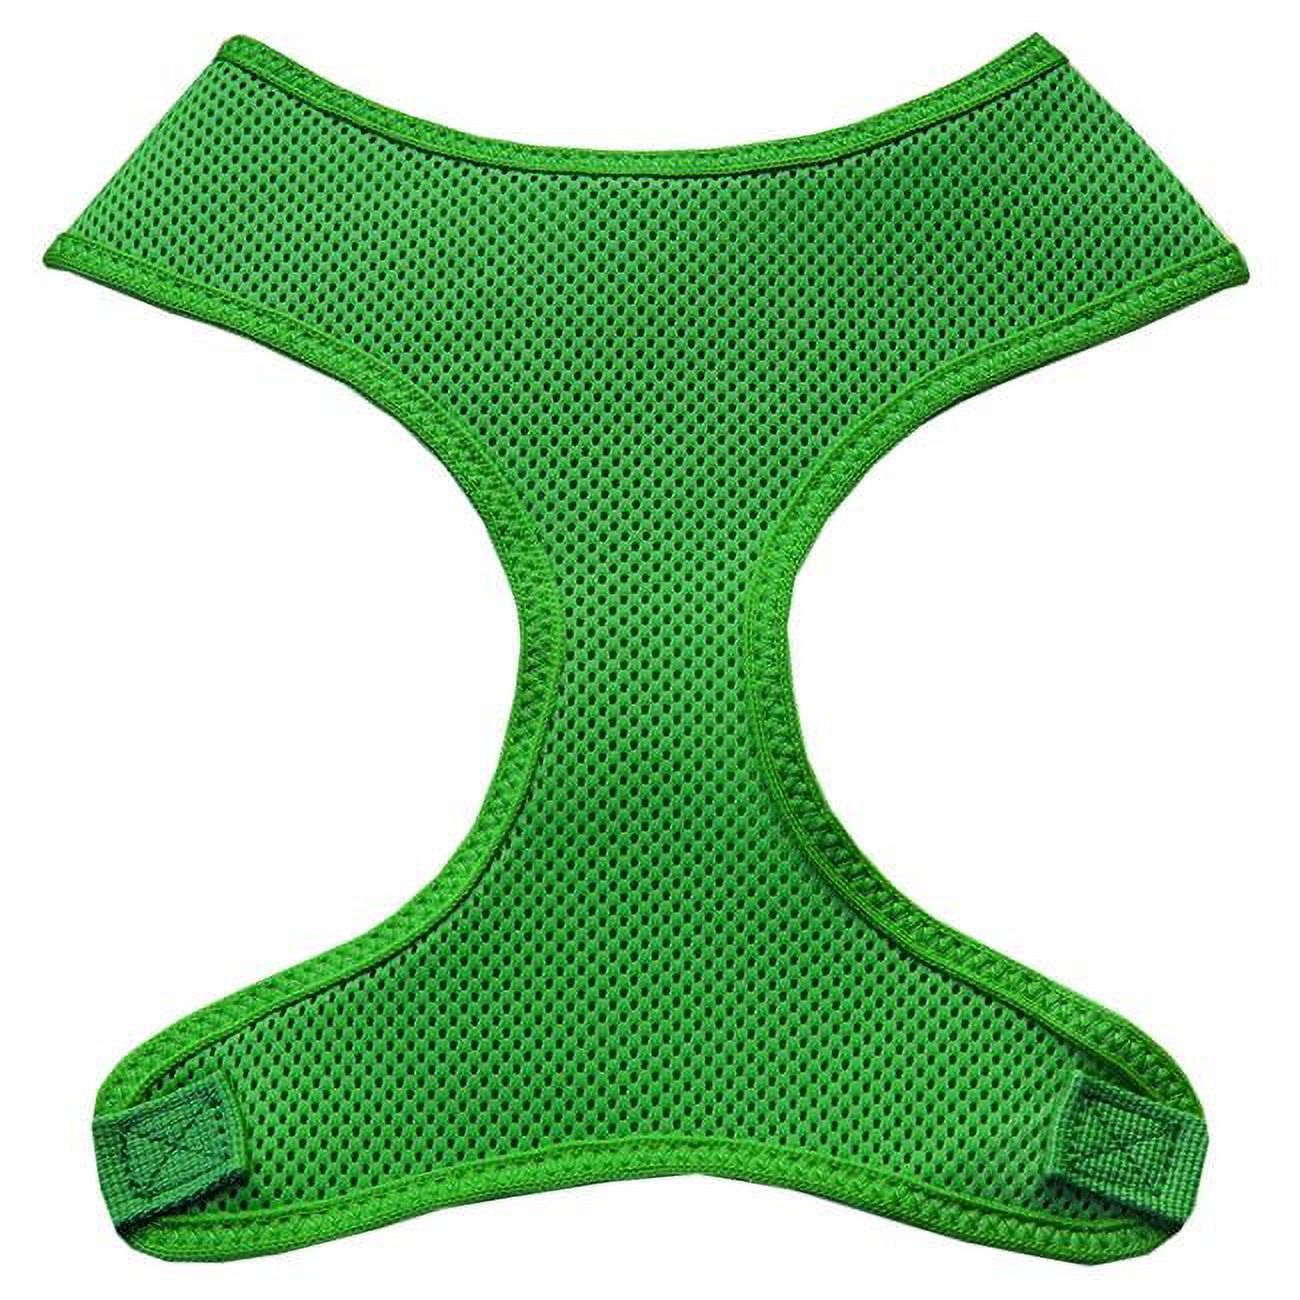 Mirage Pet Products Soft Mesh Pet Harnesses - image 1 of 10